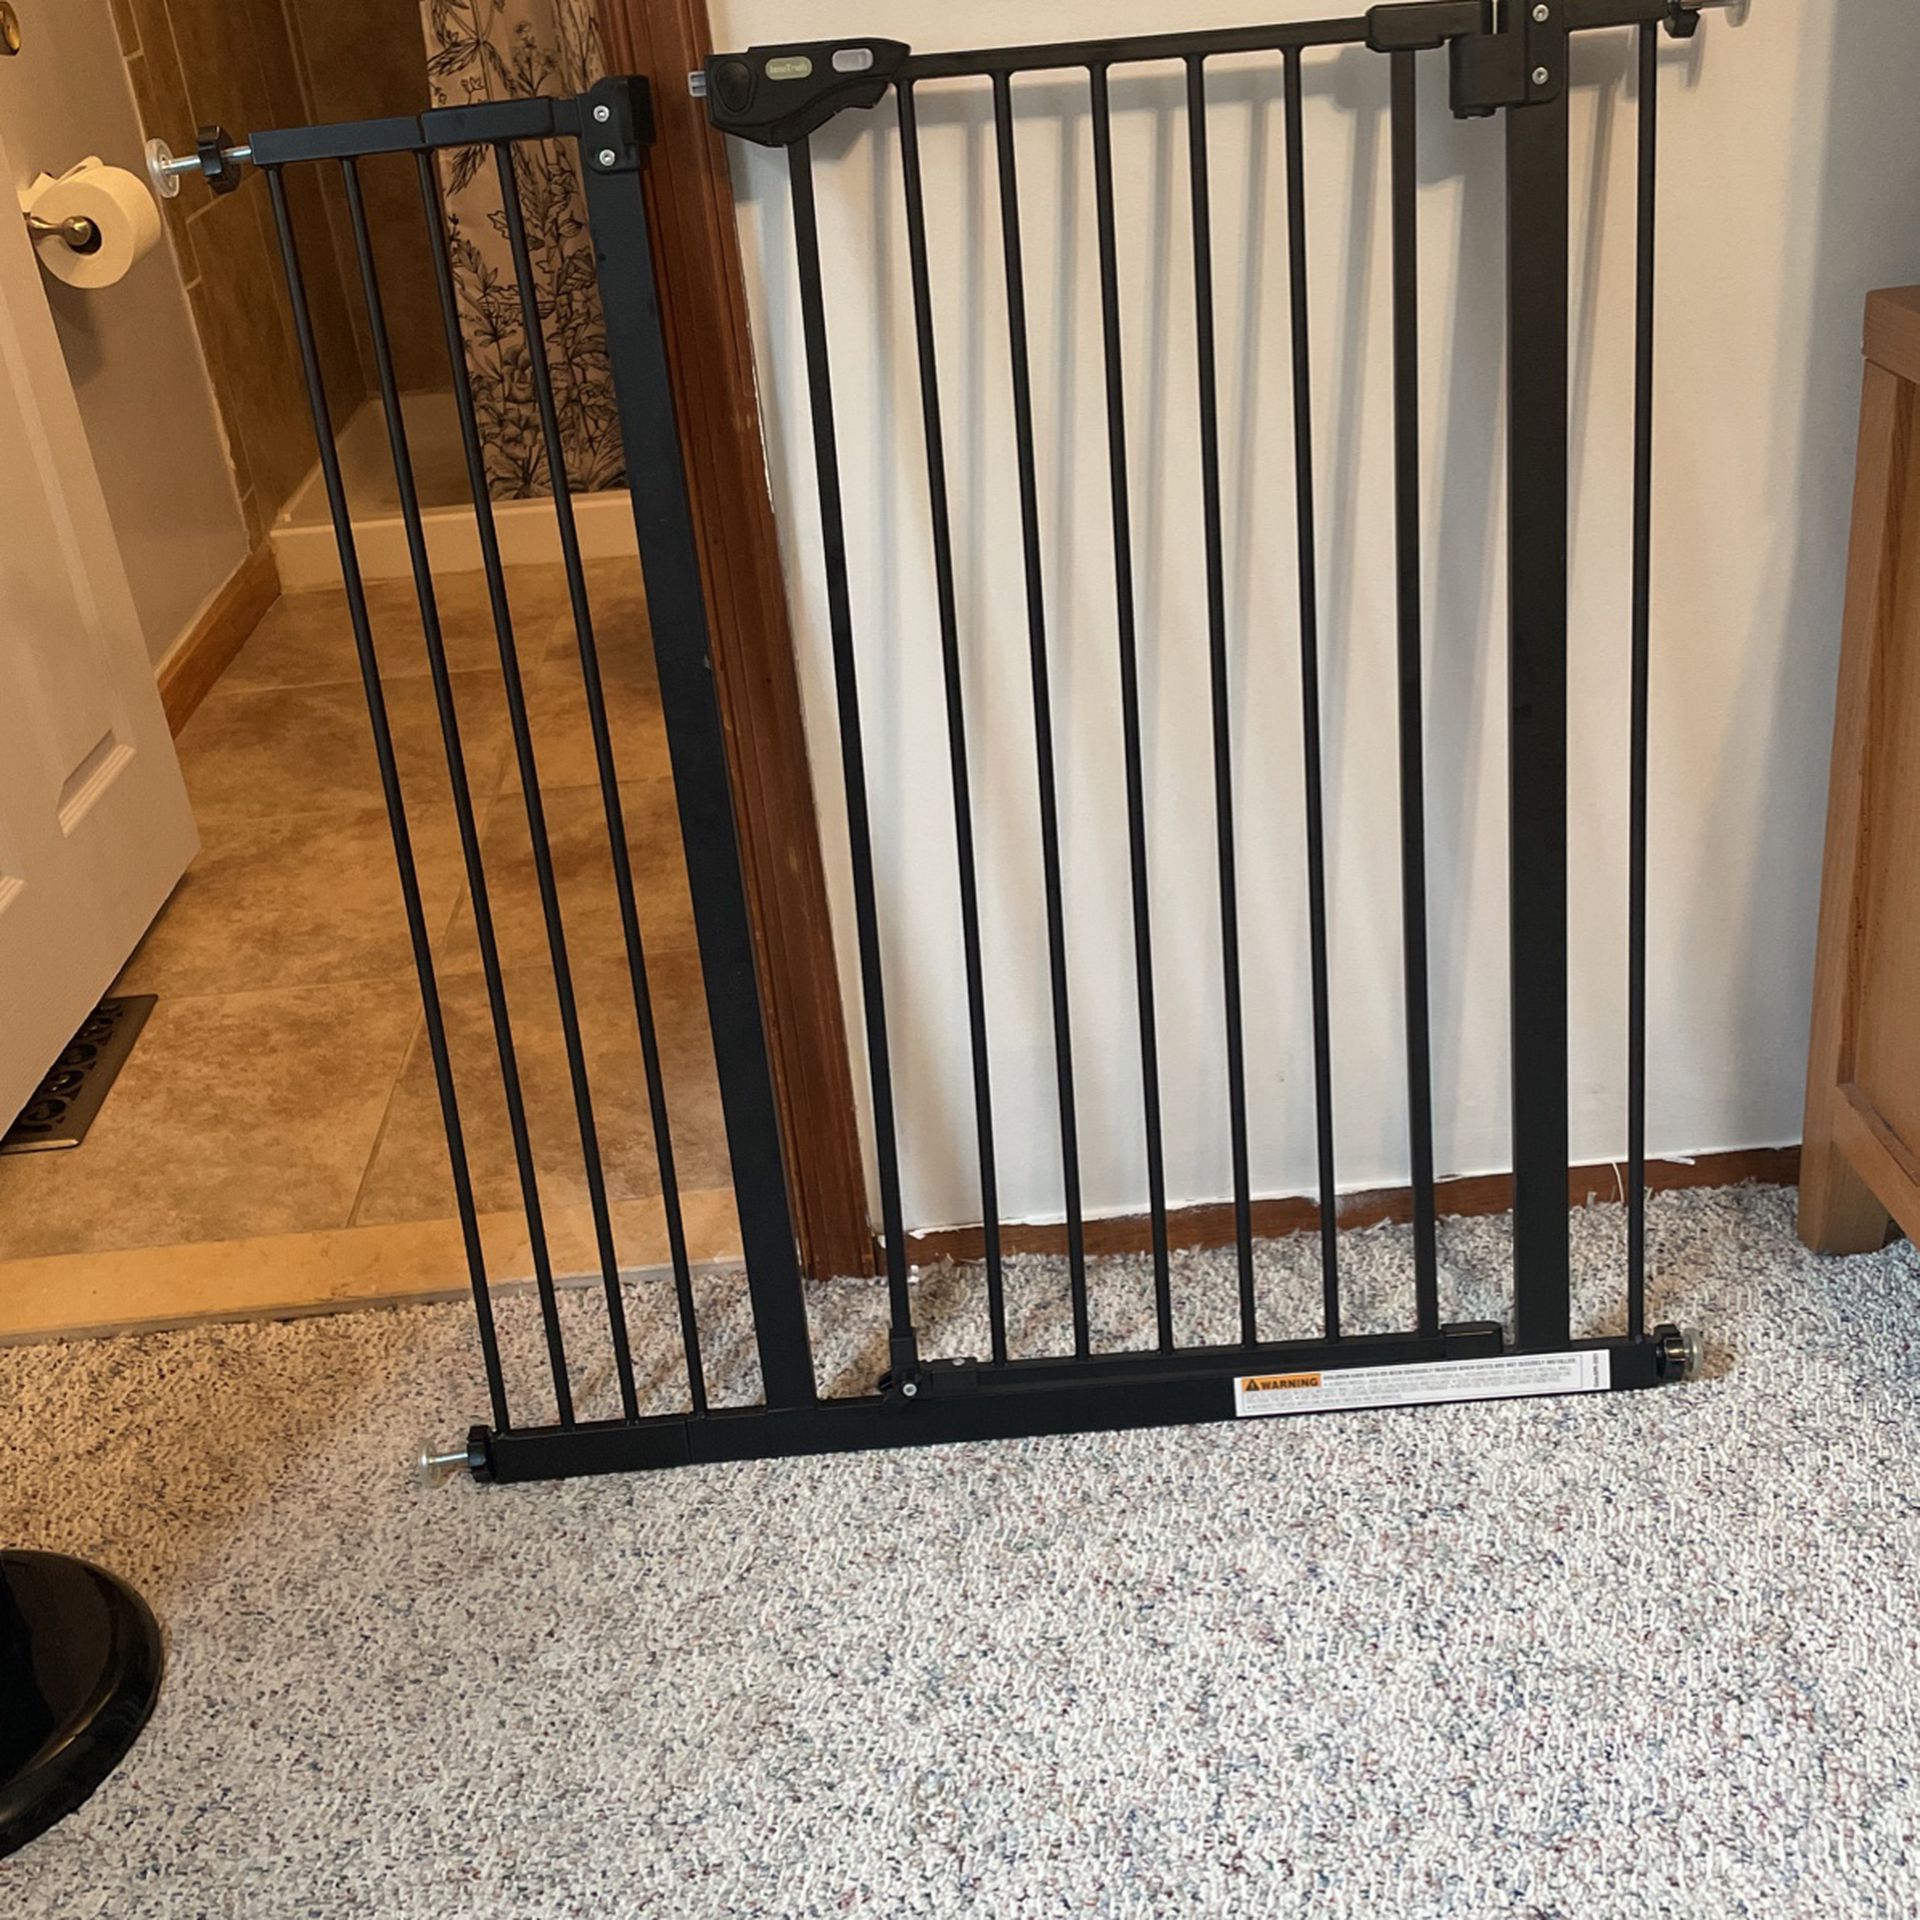 The Best Baby Gate 